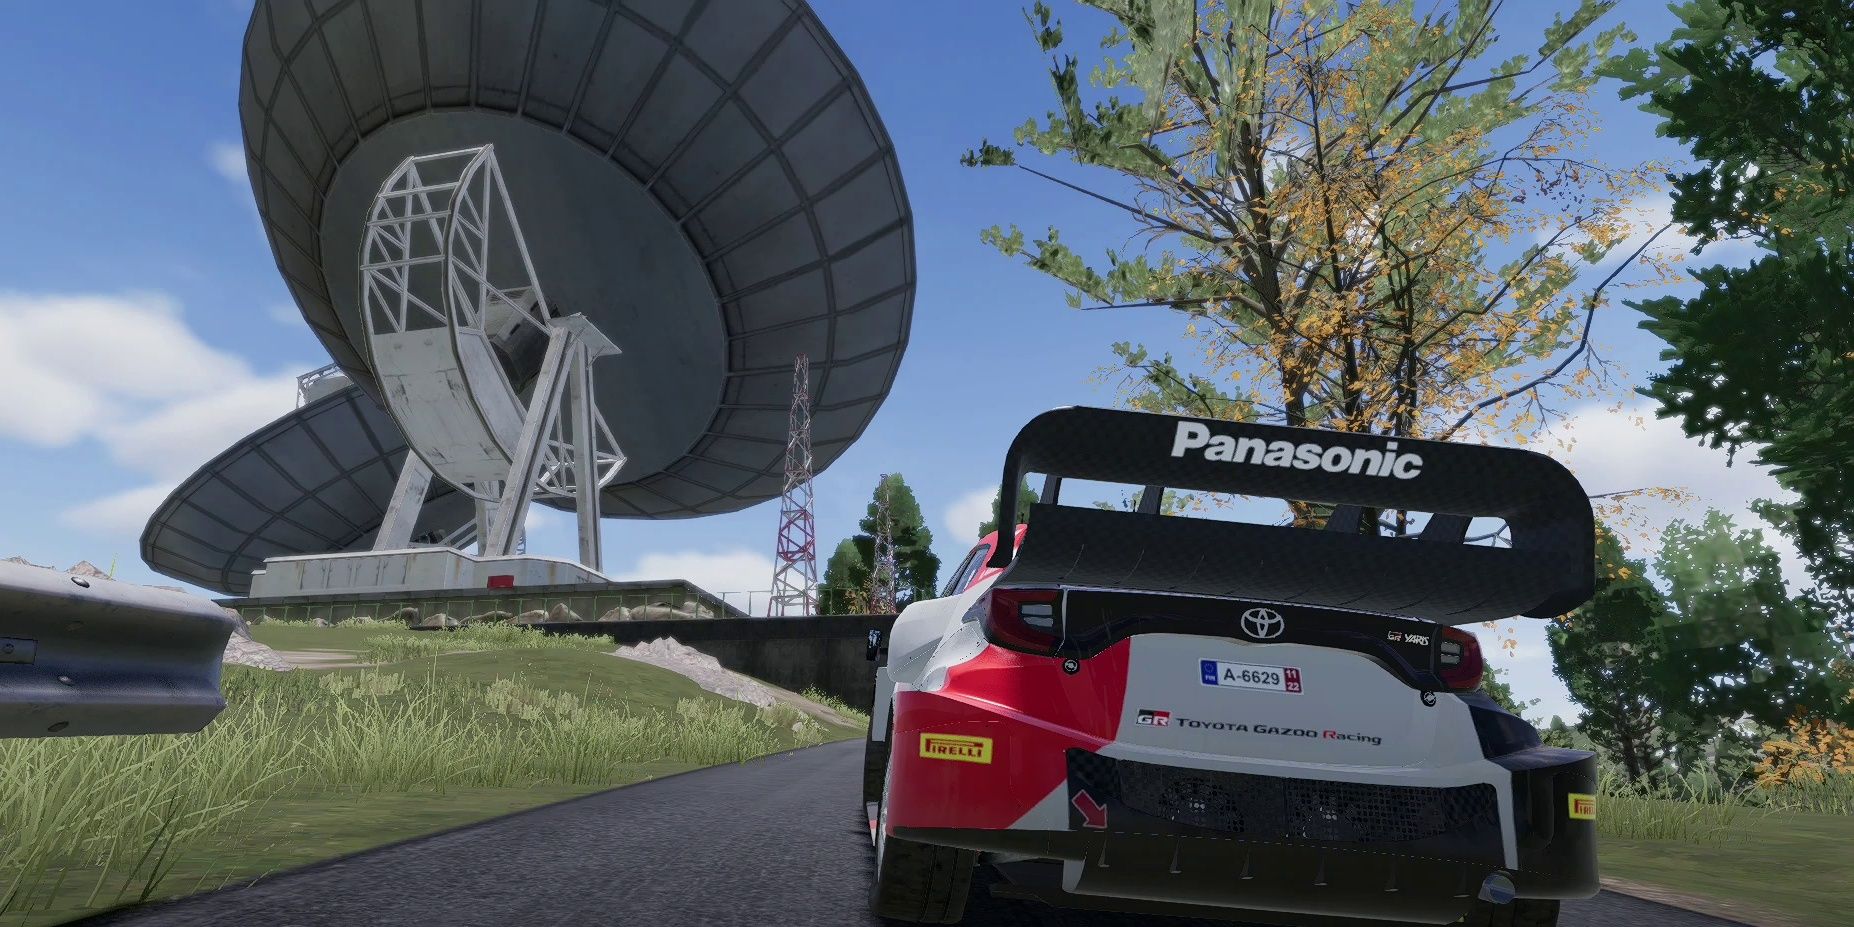 wrc generations players racing with a satalite in the background 